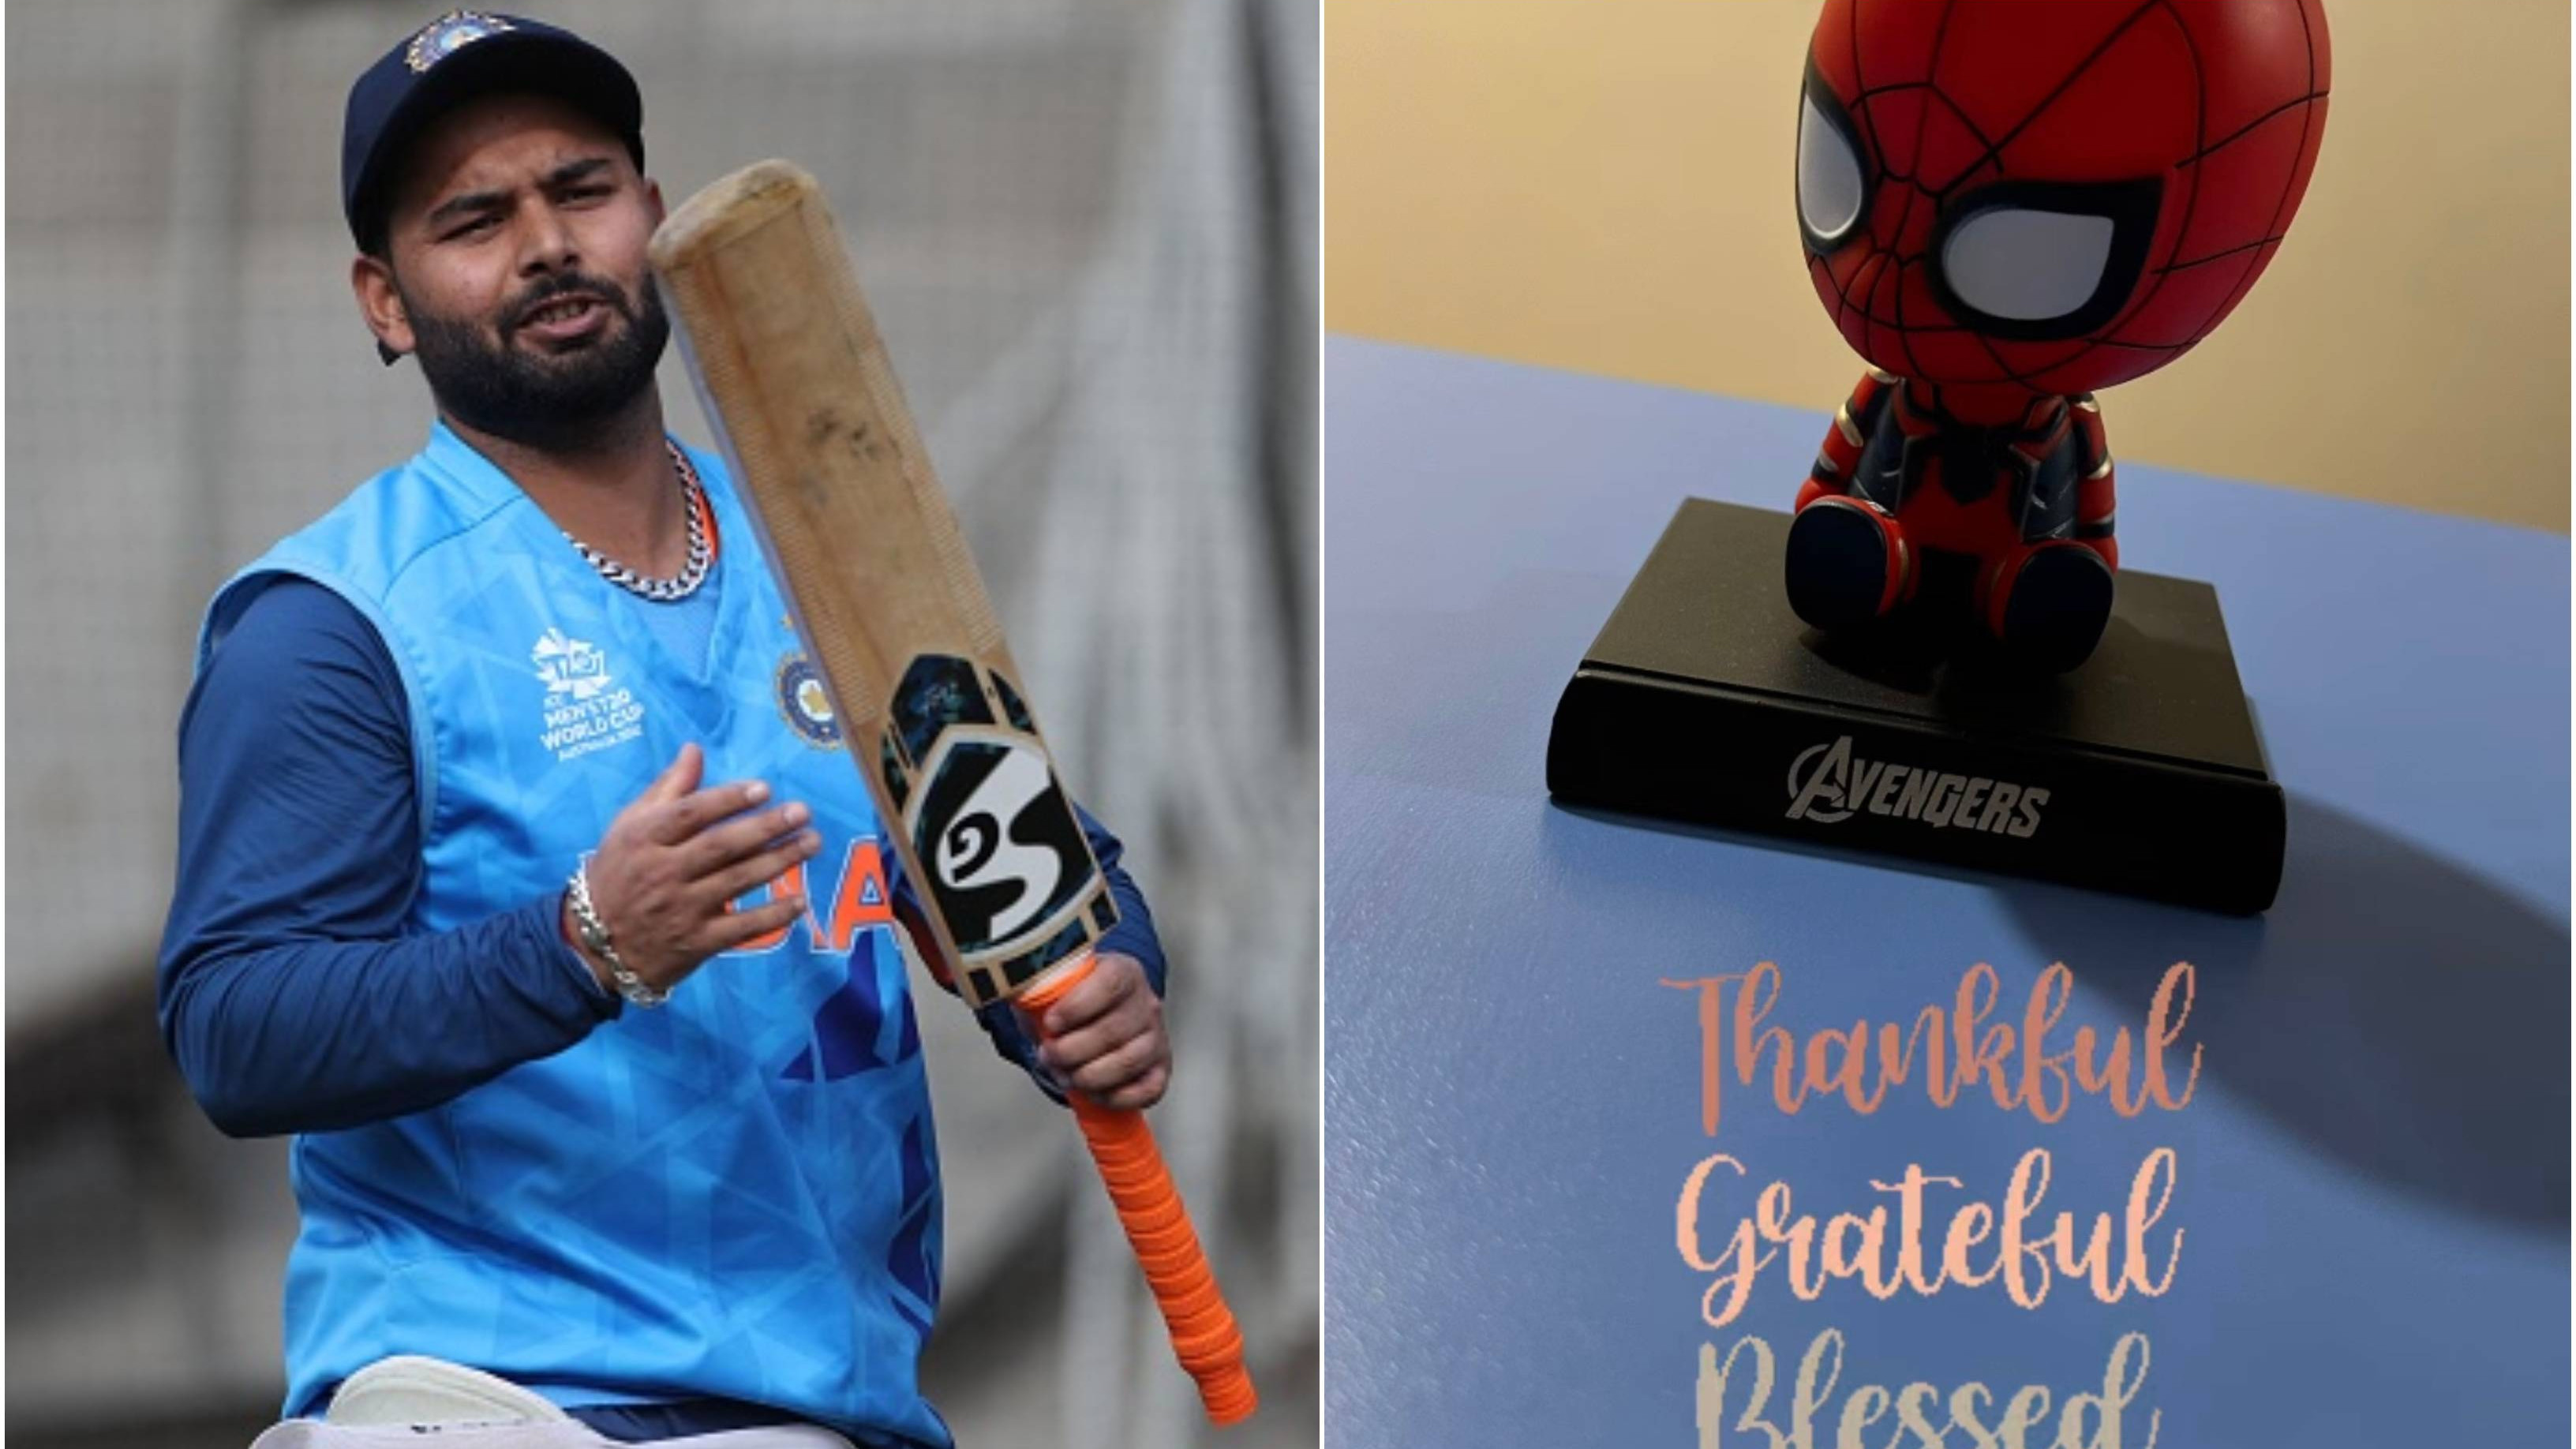 “Road to recovery has begun…”: Rishabh Pant gives health update for first time after horrific car crash